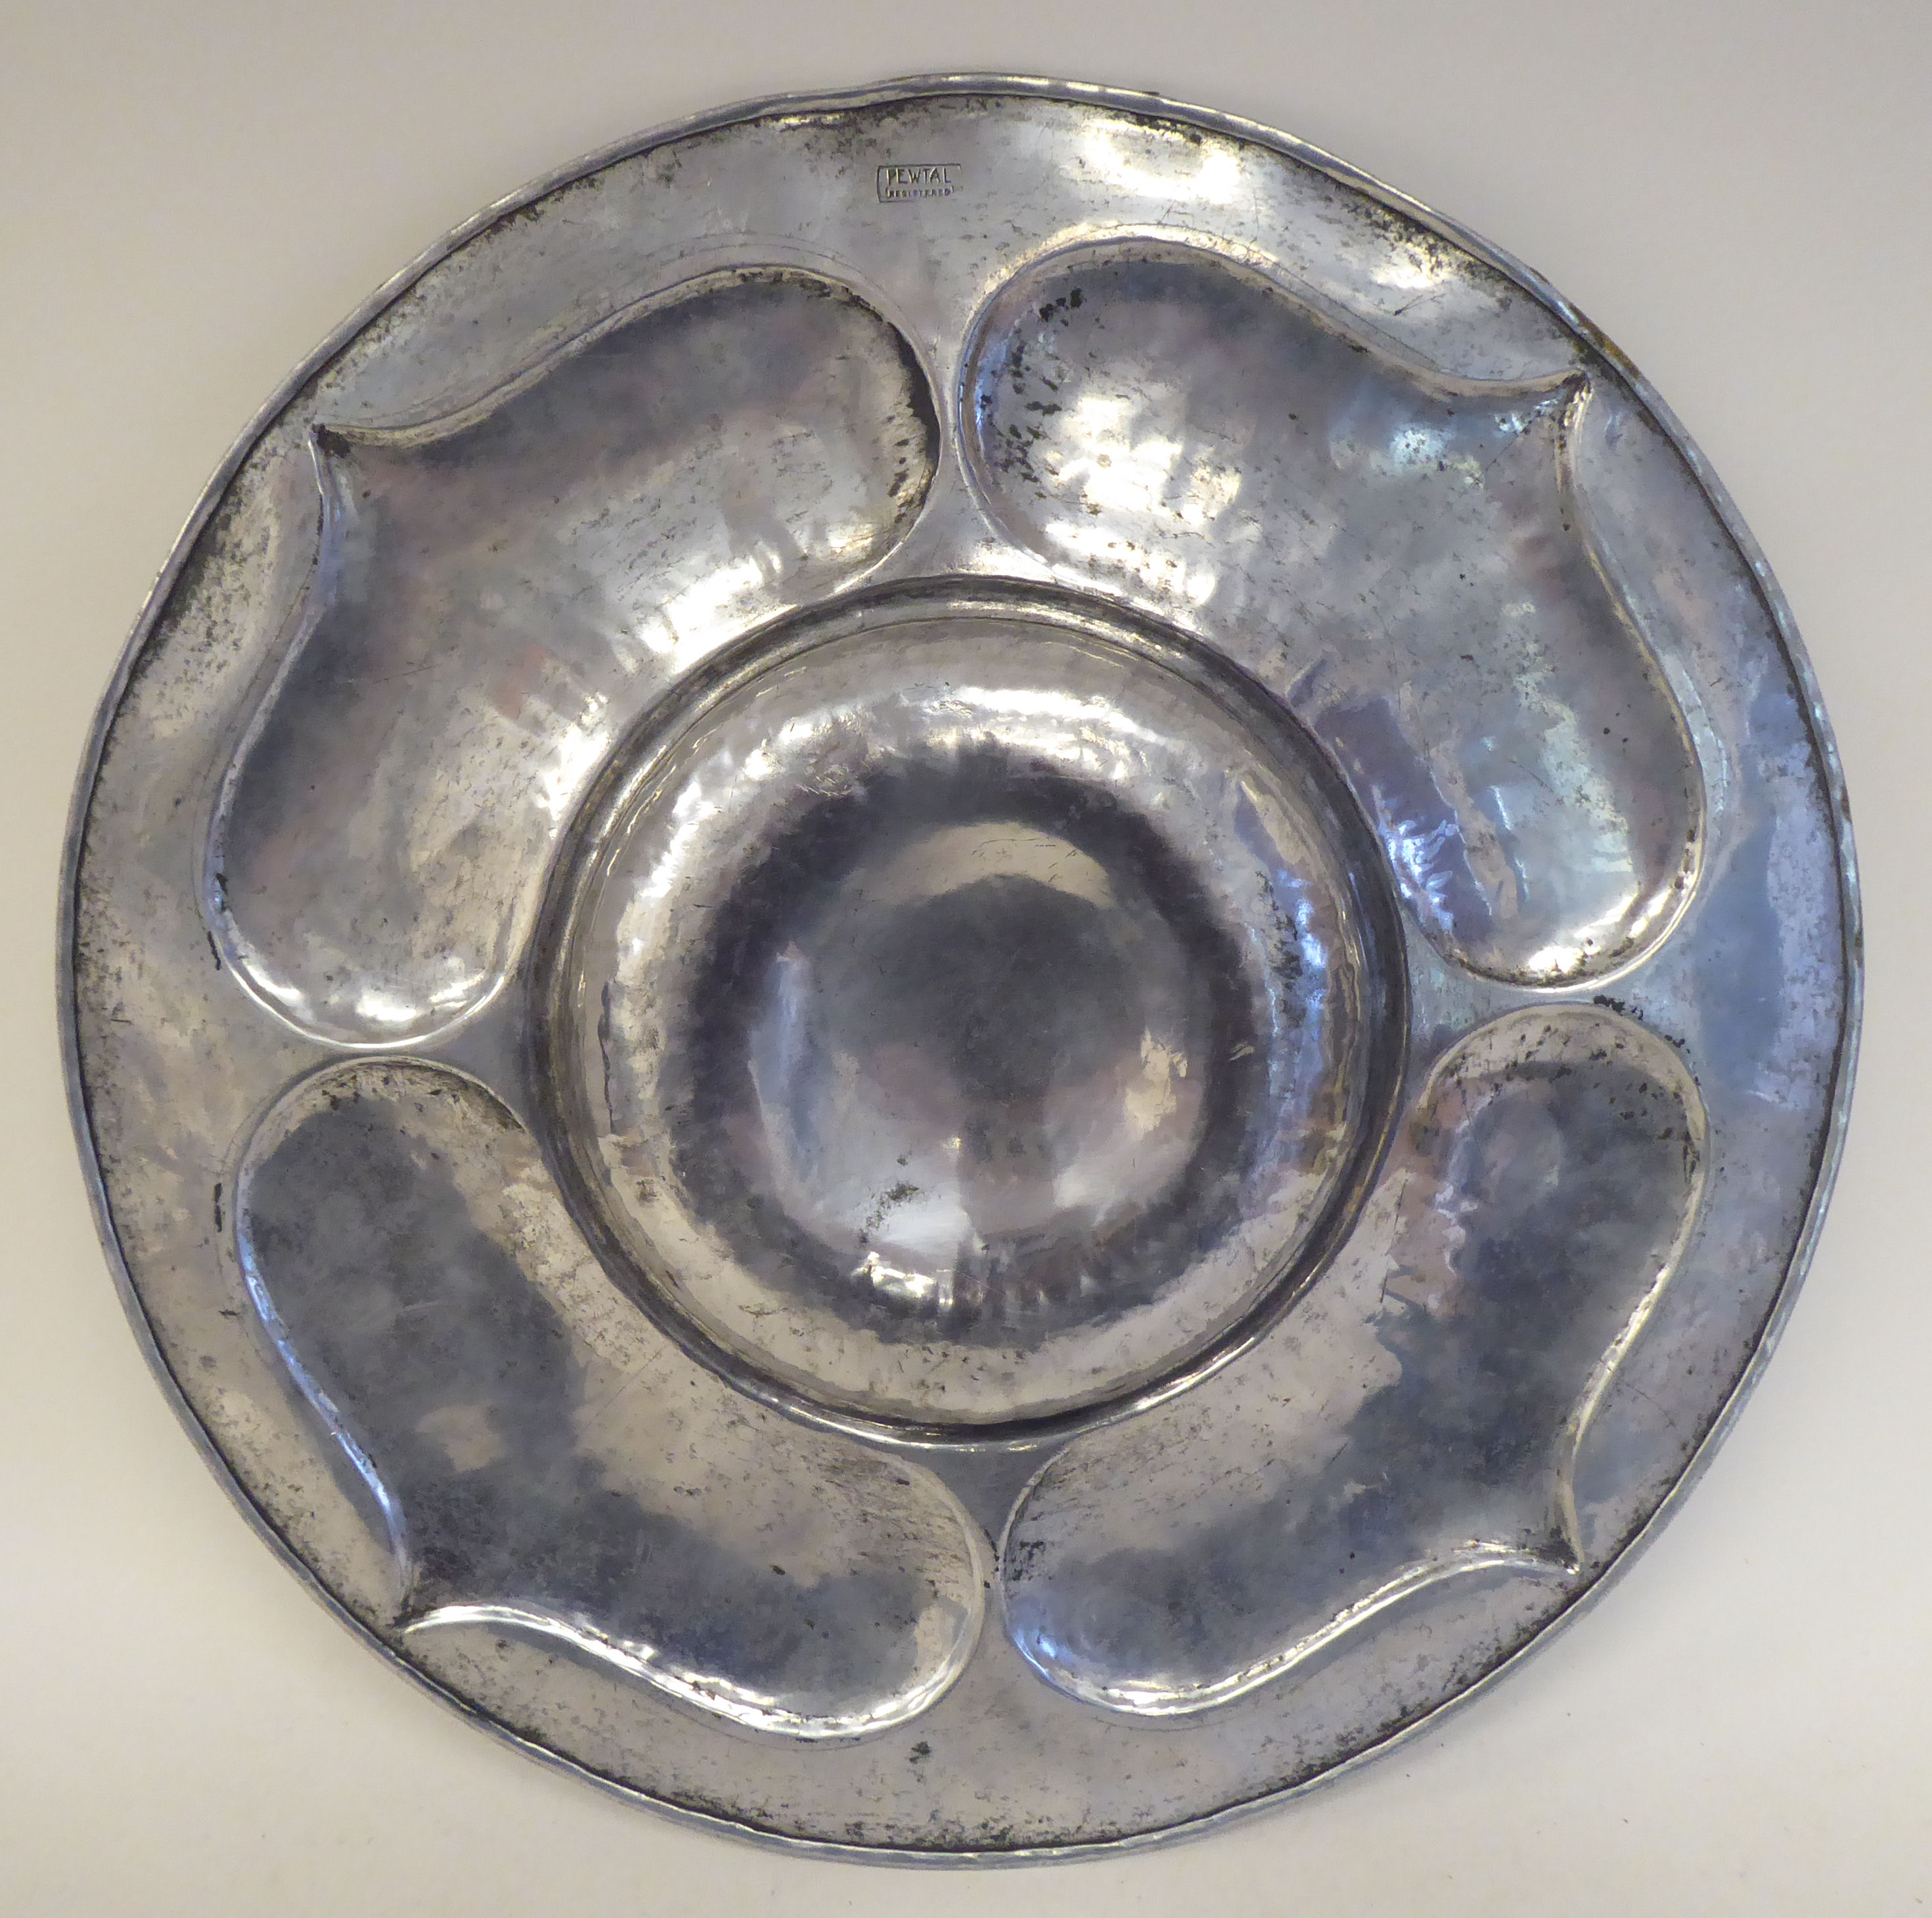 A Pewtal dish with a depressed centre, the wide rim ornamented in Art Nouveau inspired designs  15" - Image 2 of 3